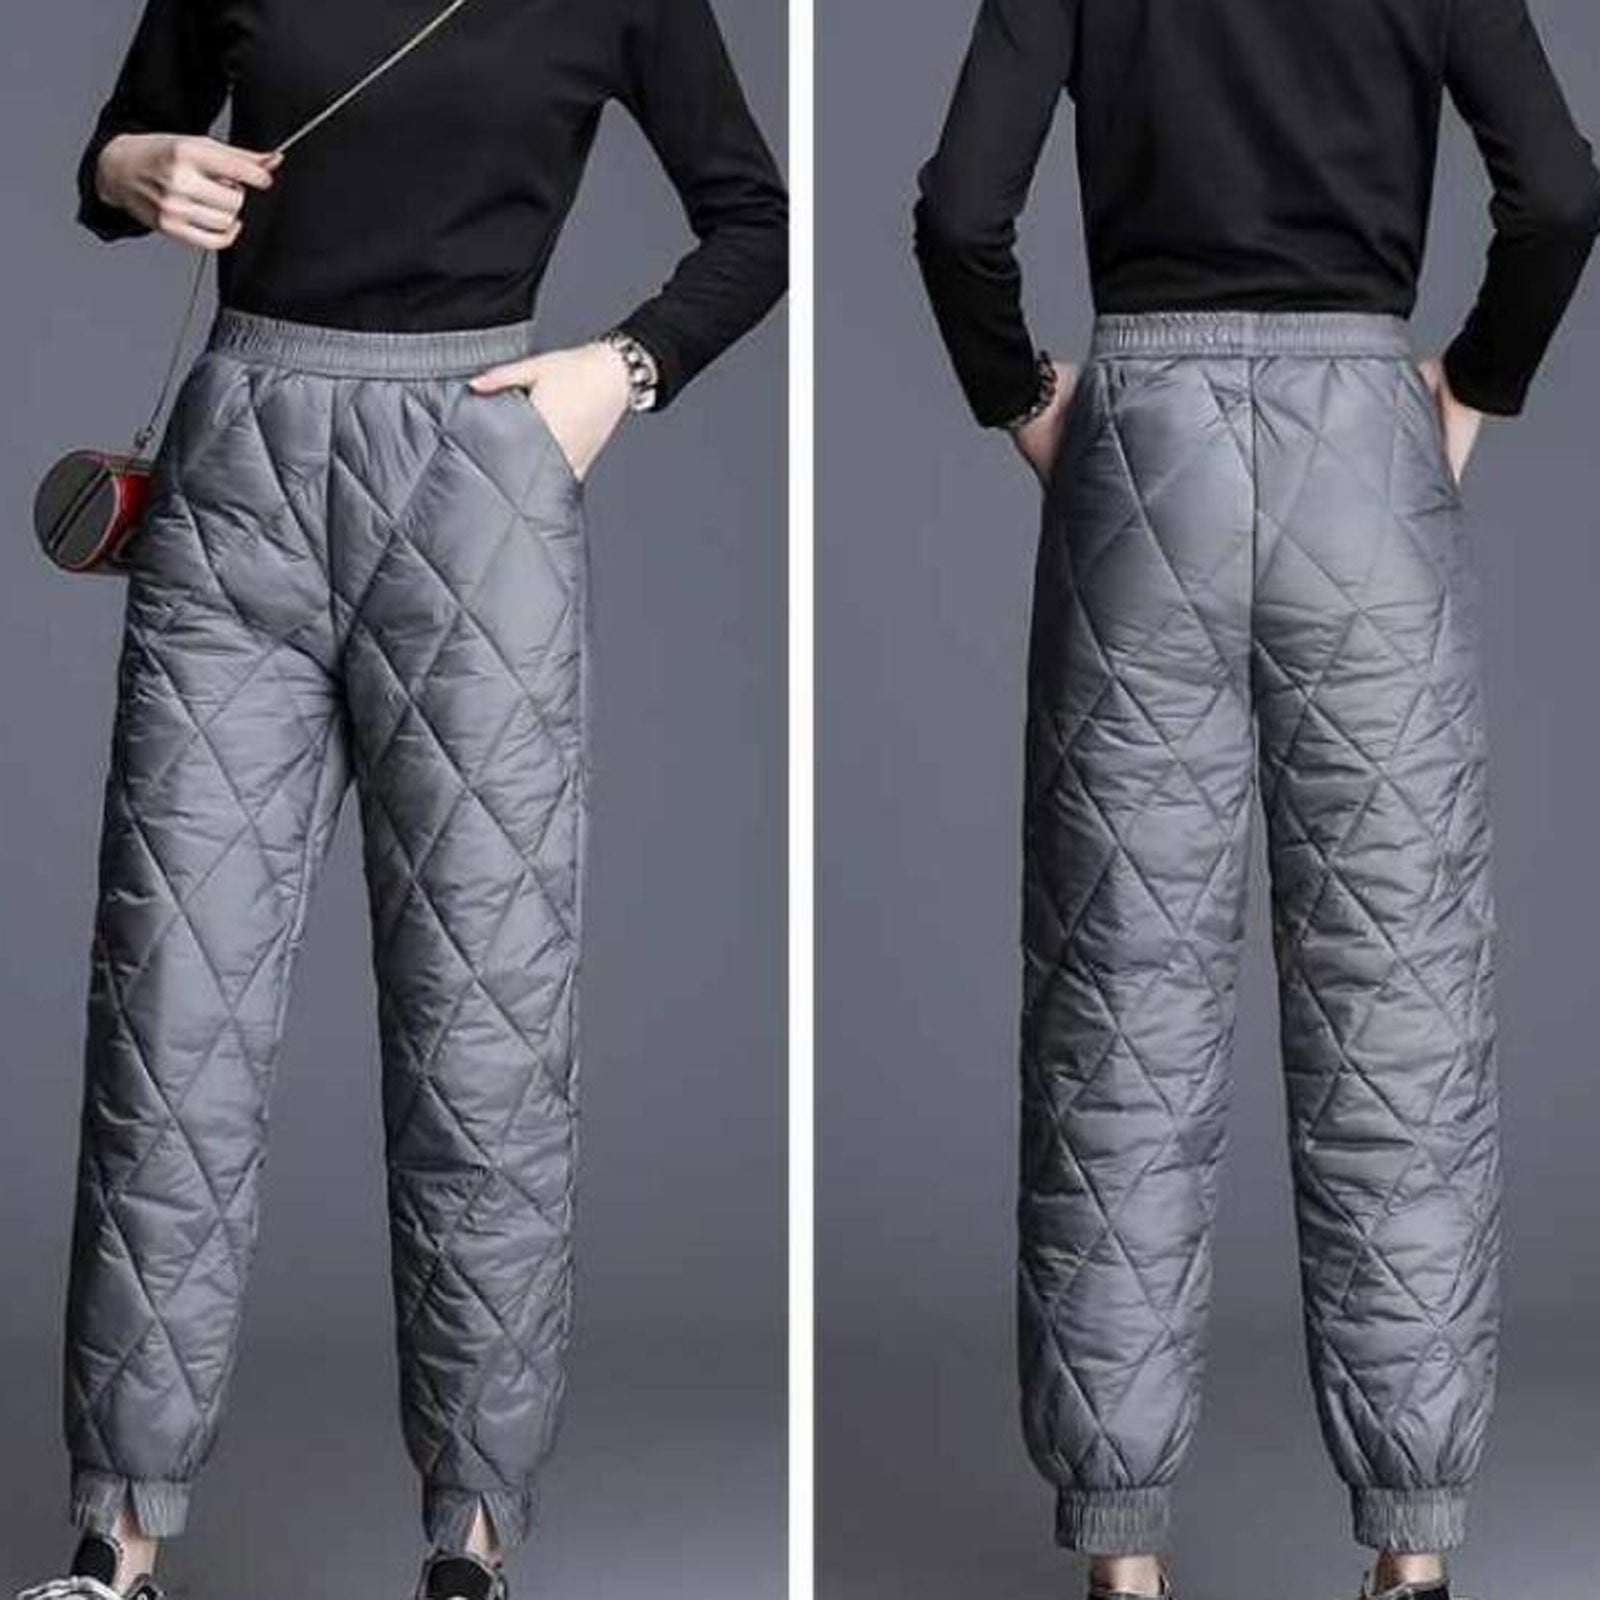 RQYYD Women's Lightweight Puffy Pants Elastic High Waist Quilted Snow Pants  Puffer Winter Trousers for Ski Camp Gray XL 